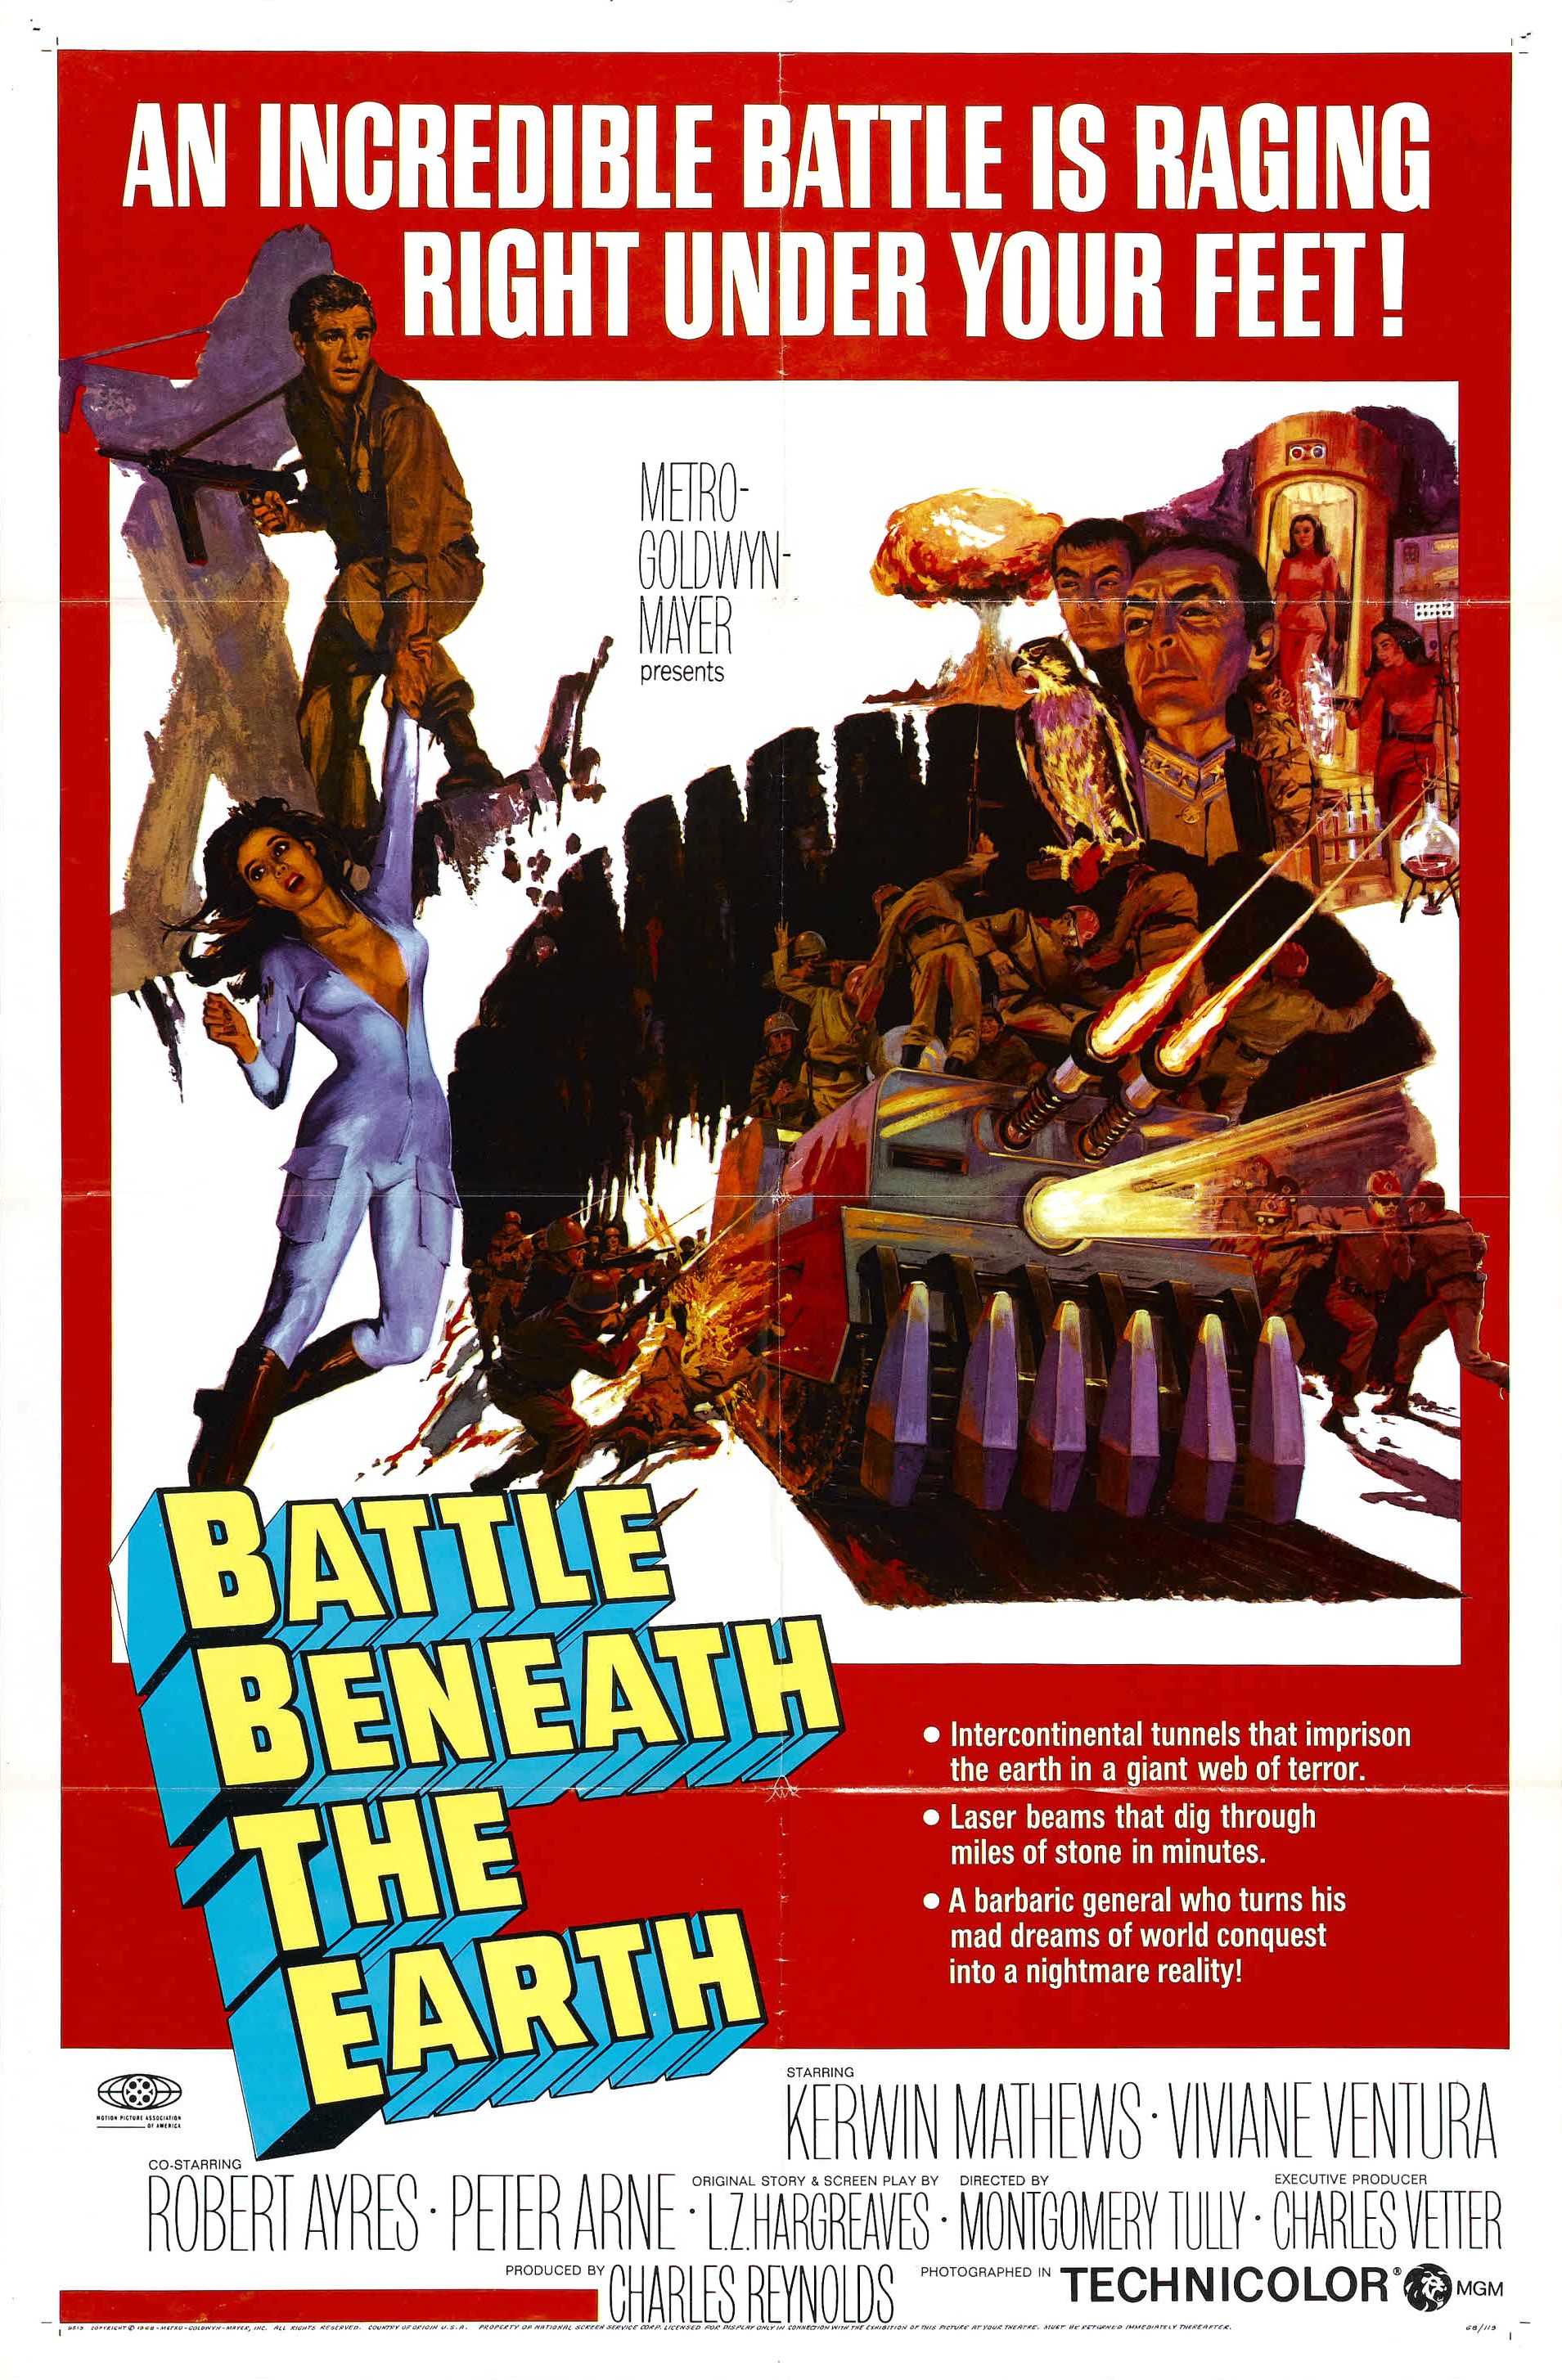 battle beneath the earth - An Incredible Battle Is Raging Right Under Your Feet! Battle Beneath The Earth Berir Toestro that is a gent after Laser bons that d et mies of stone in intes. A tertens wheshin madras el words Die Kerwin Mathews Viviane Ventura 